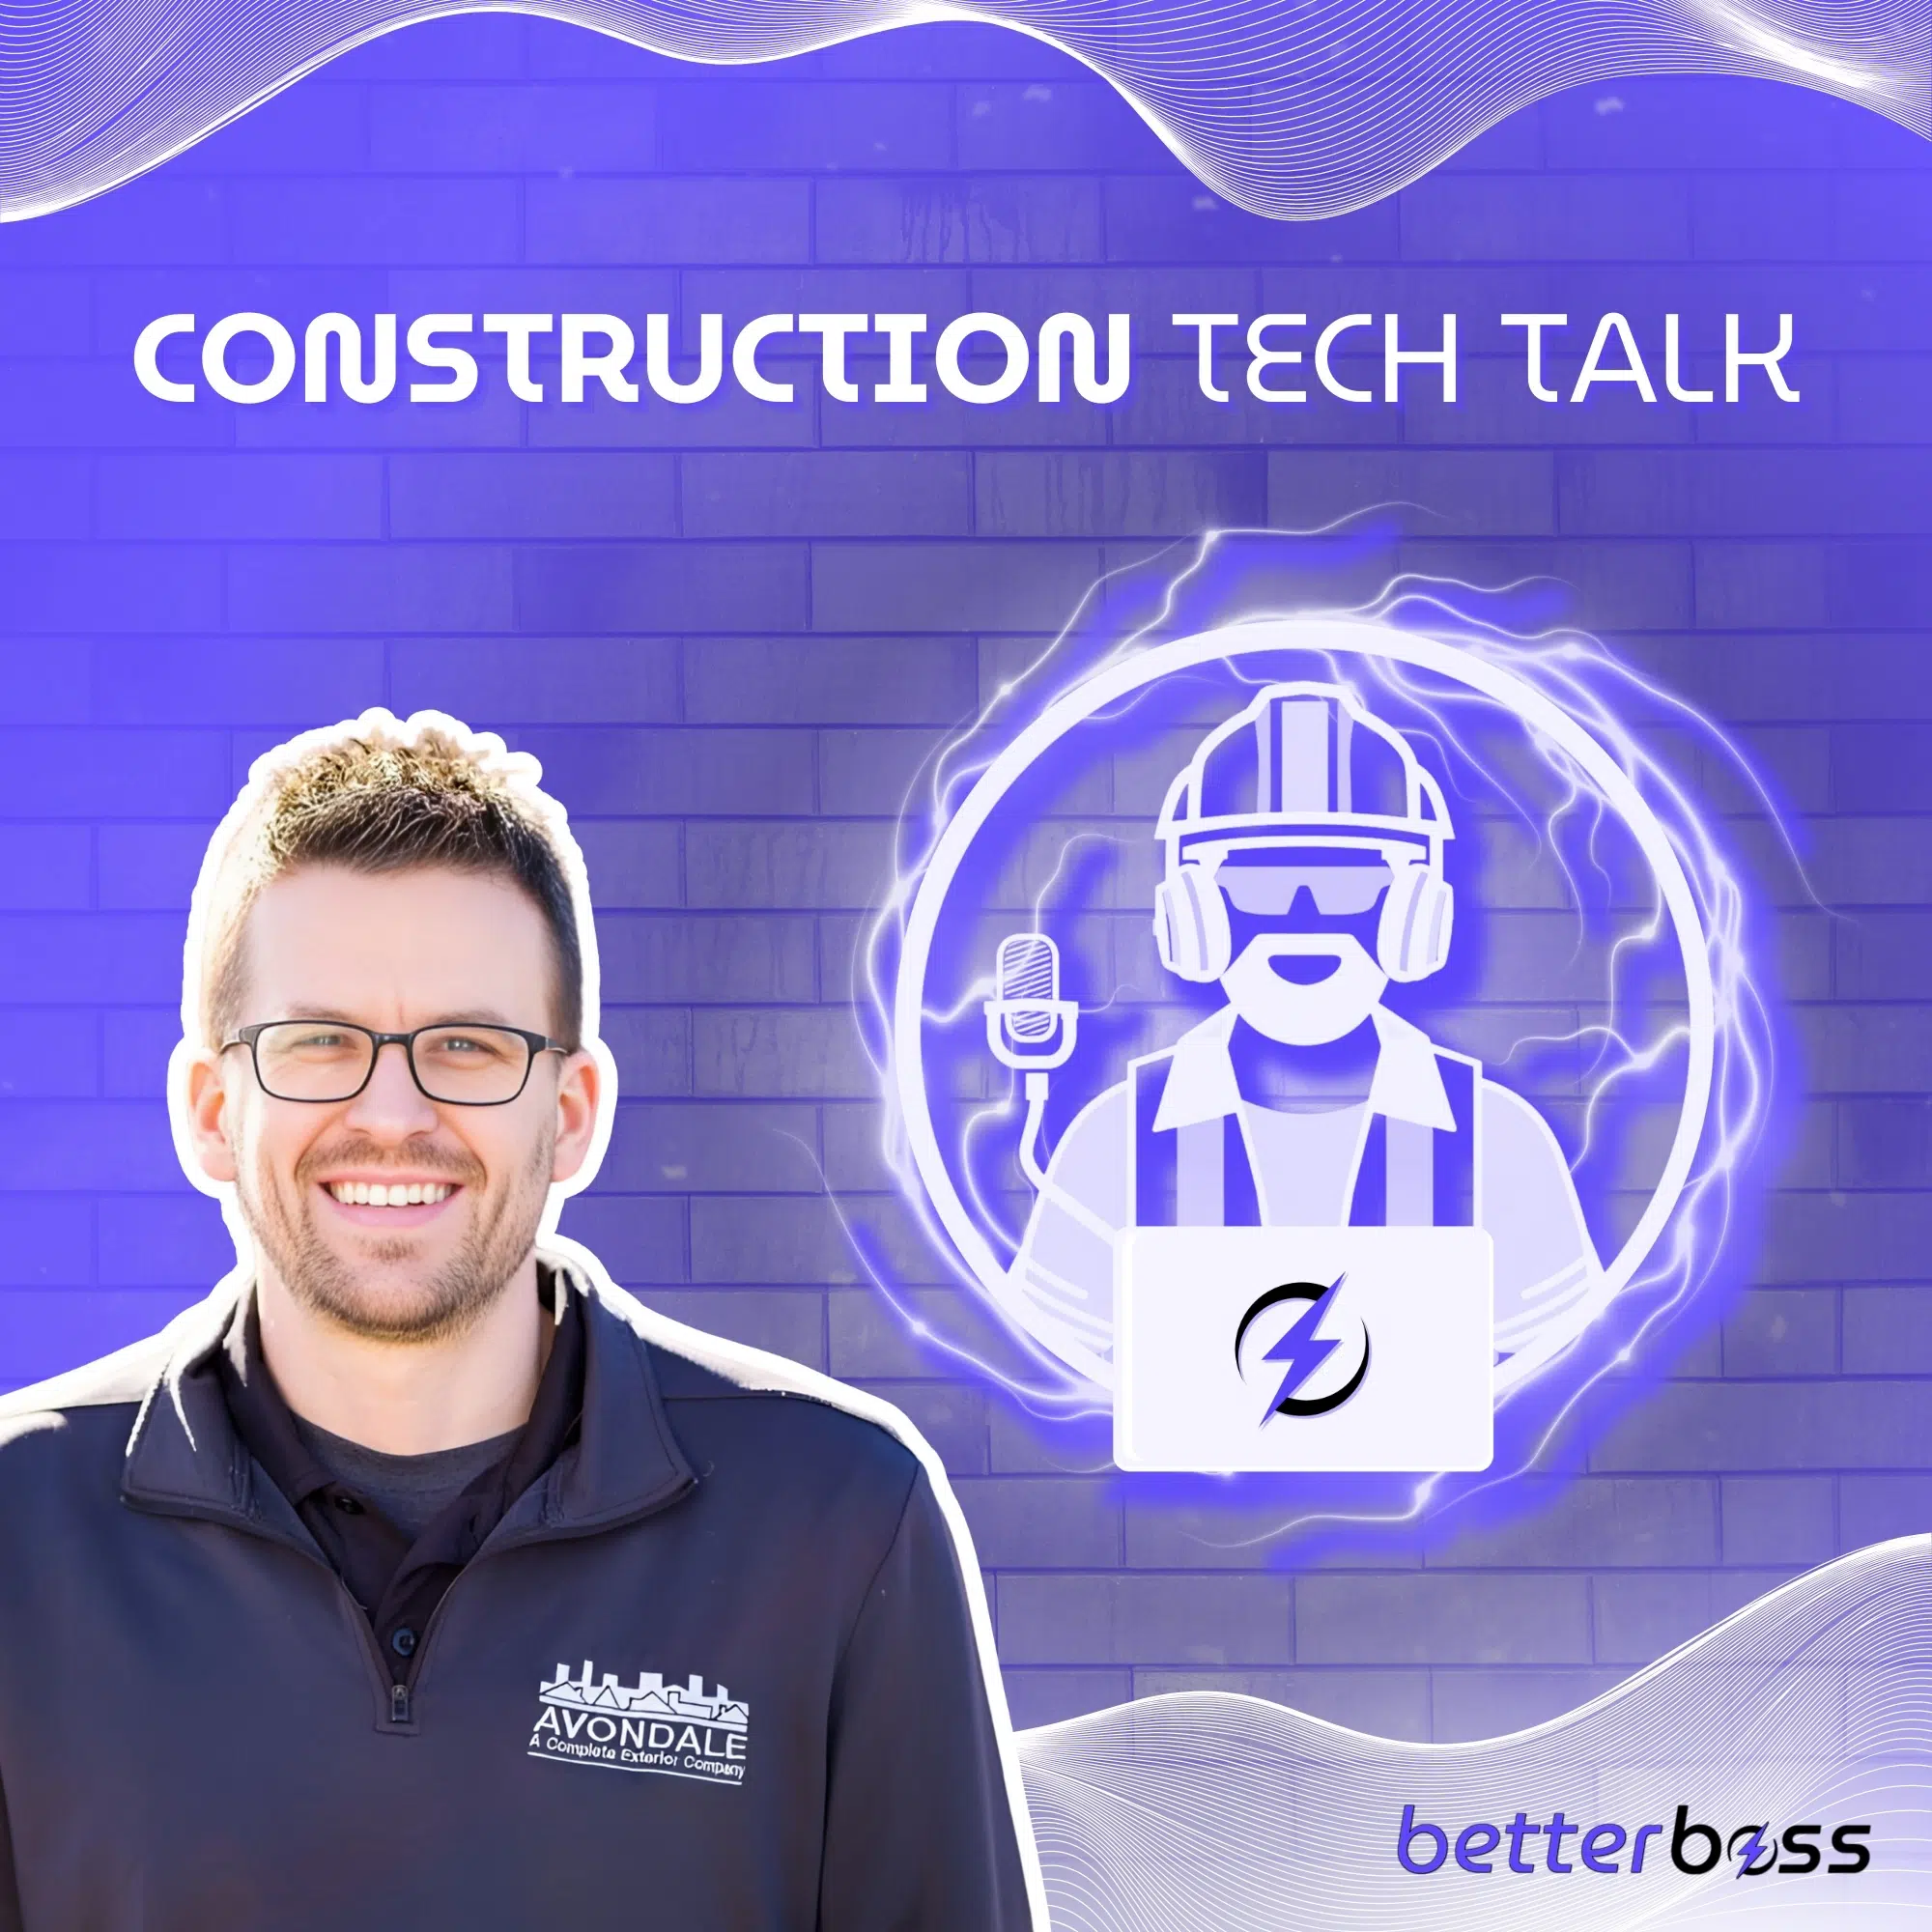 Roofing Business: How I Built My Multi-Million Dollar Empire - Contractor Podcast, Construction Tech Talk